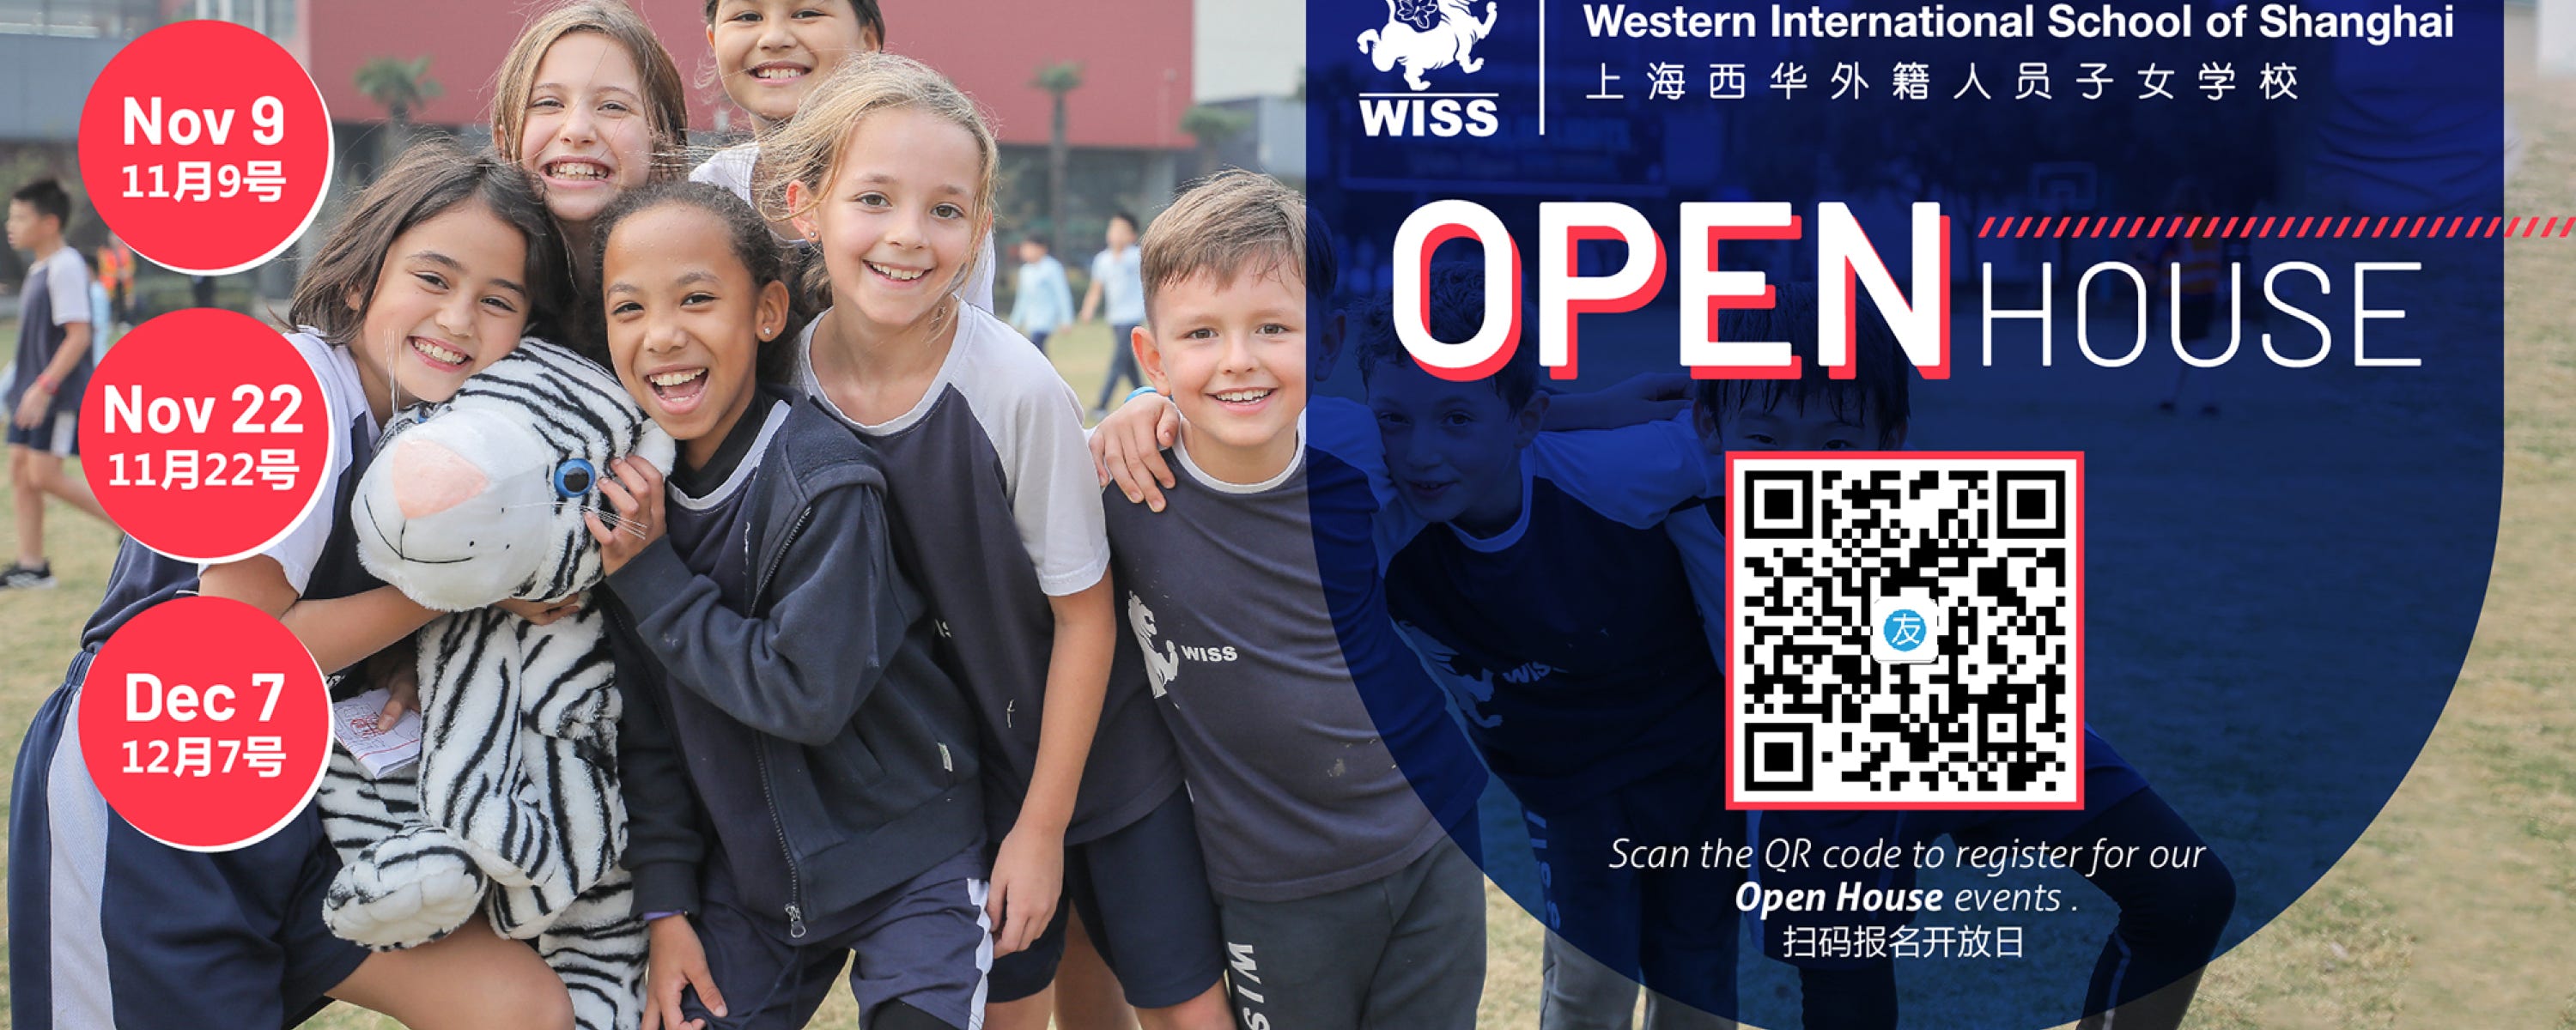 Leading the Future of WISS Open House | Exceptional International Education